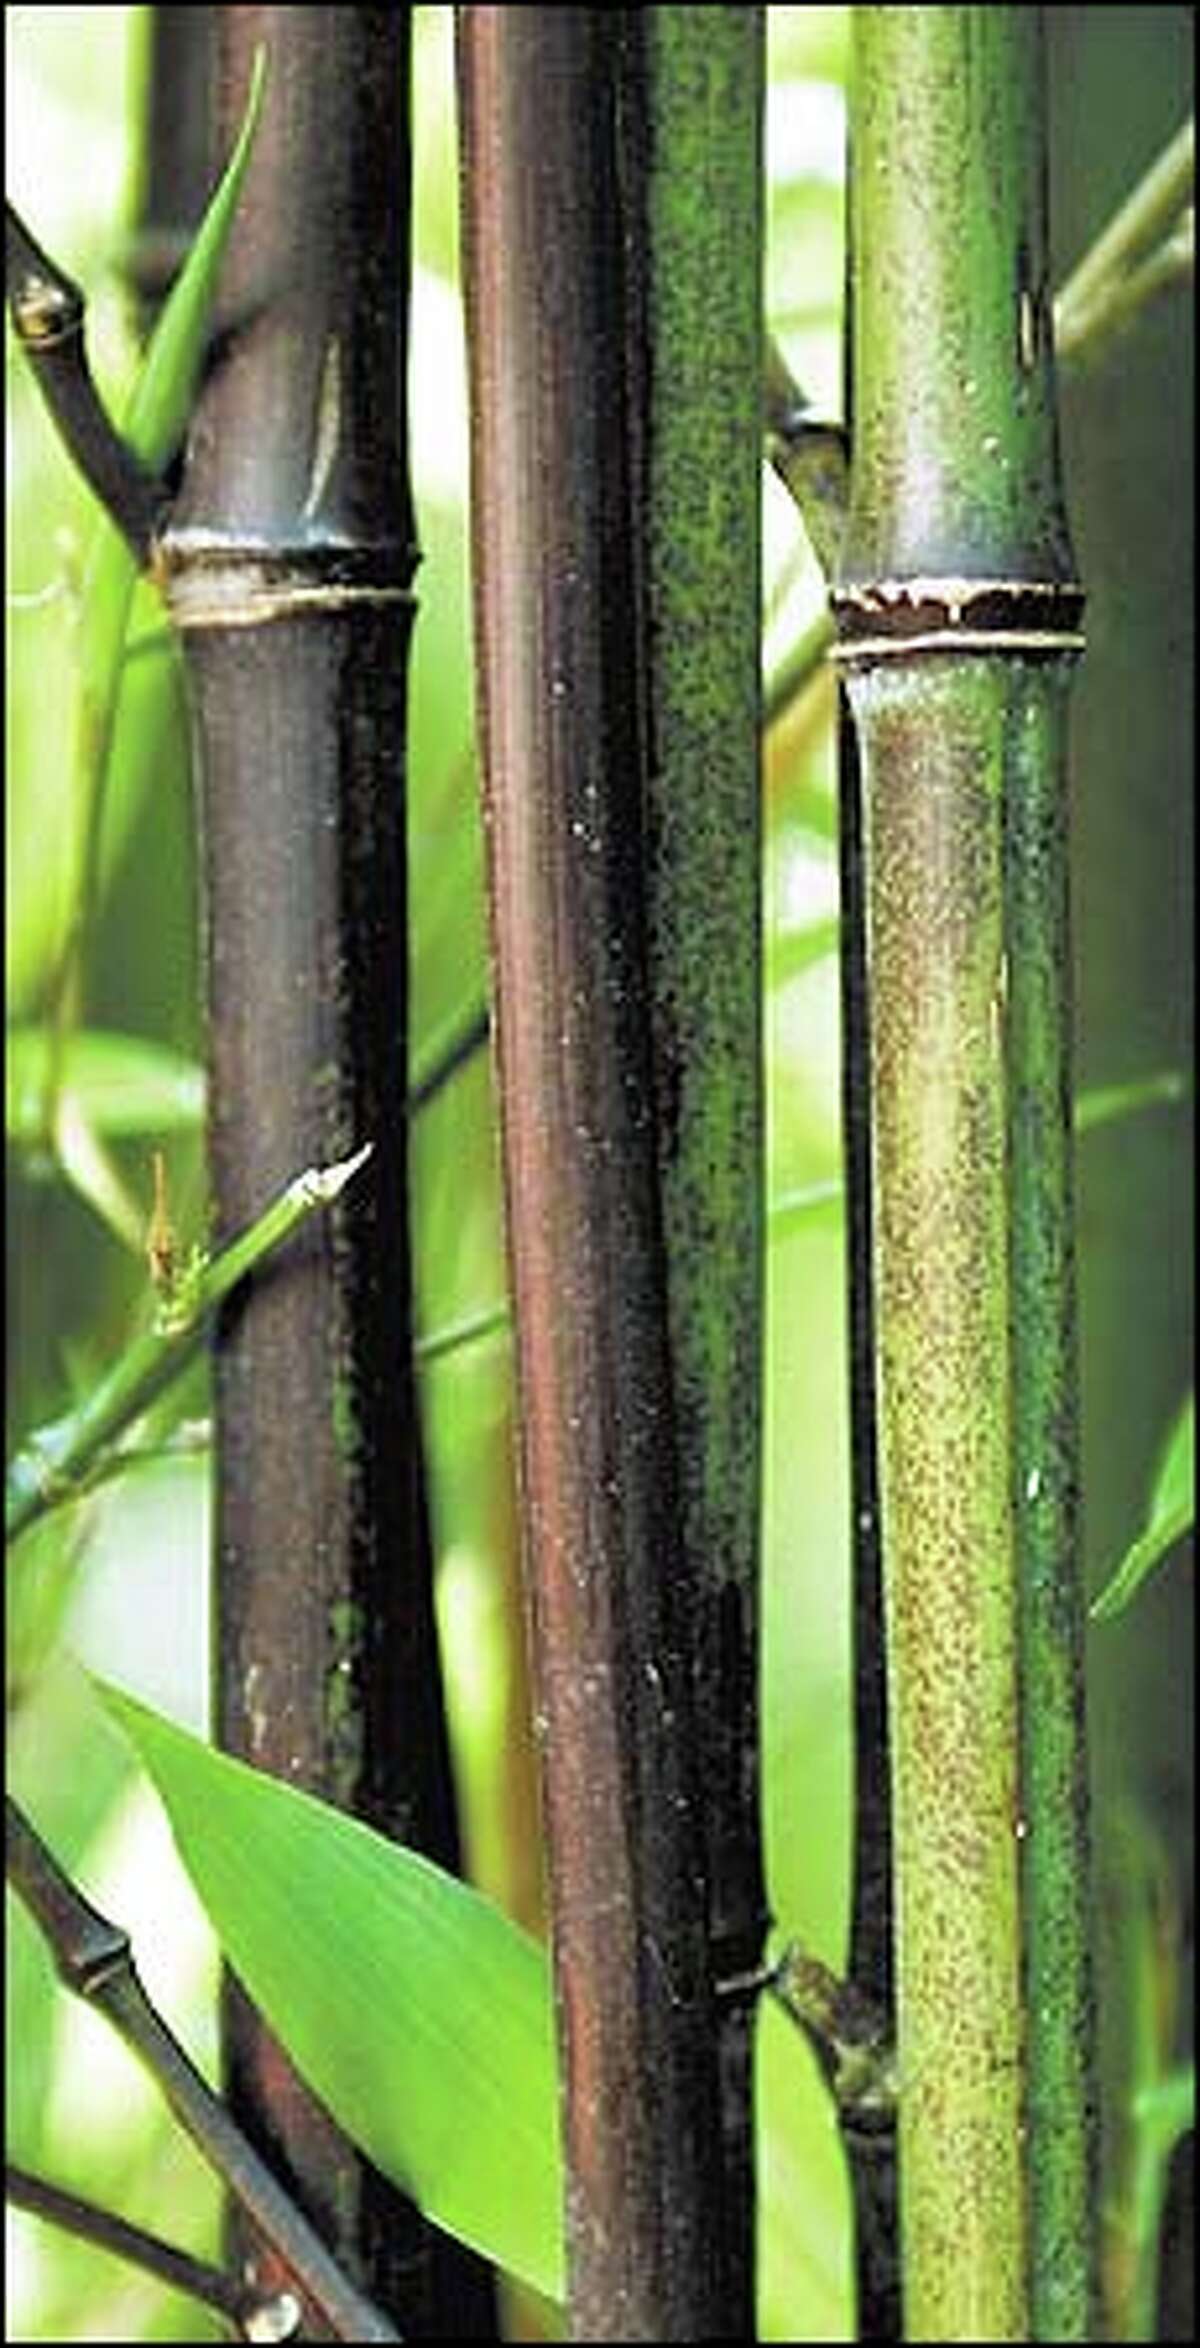 Varieties of rare bamboo suitable for the Northwest include Phyllostachys nigra, which can grow to 30 feet.